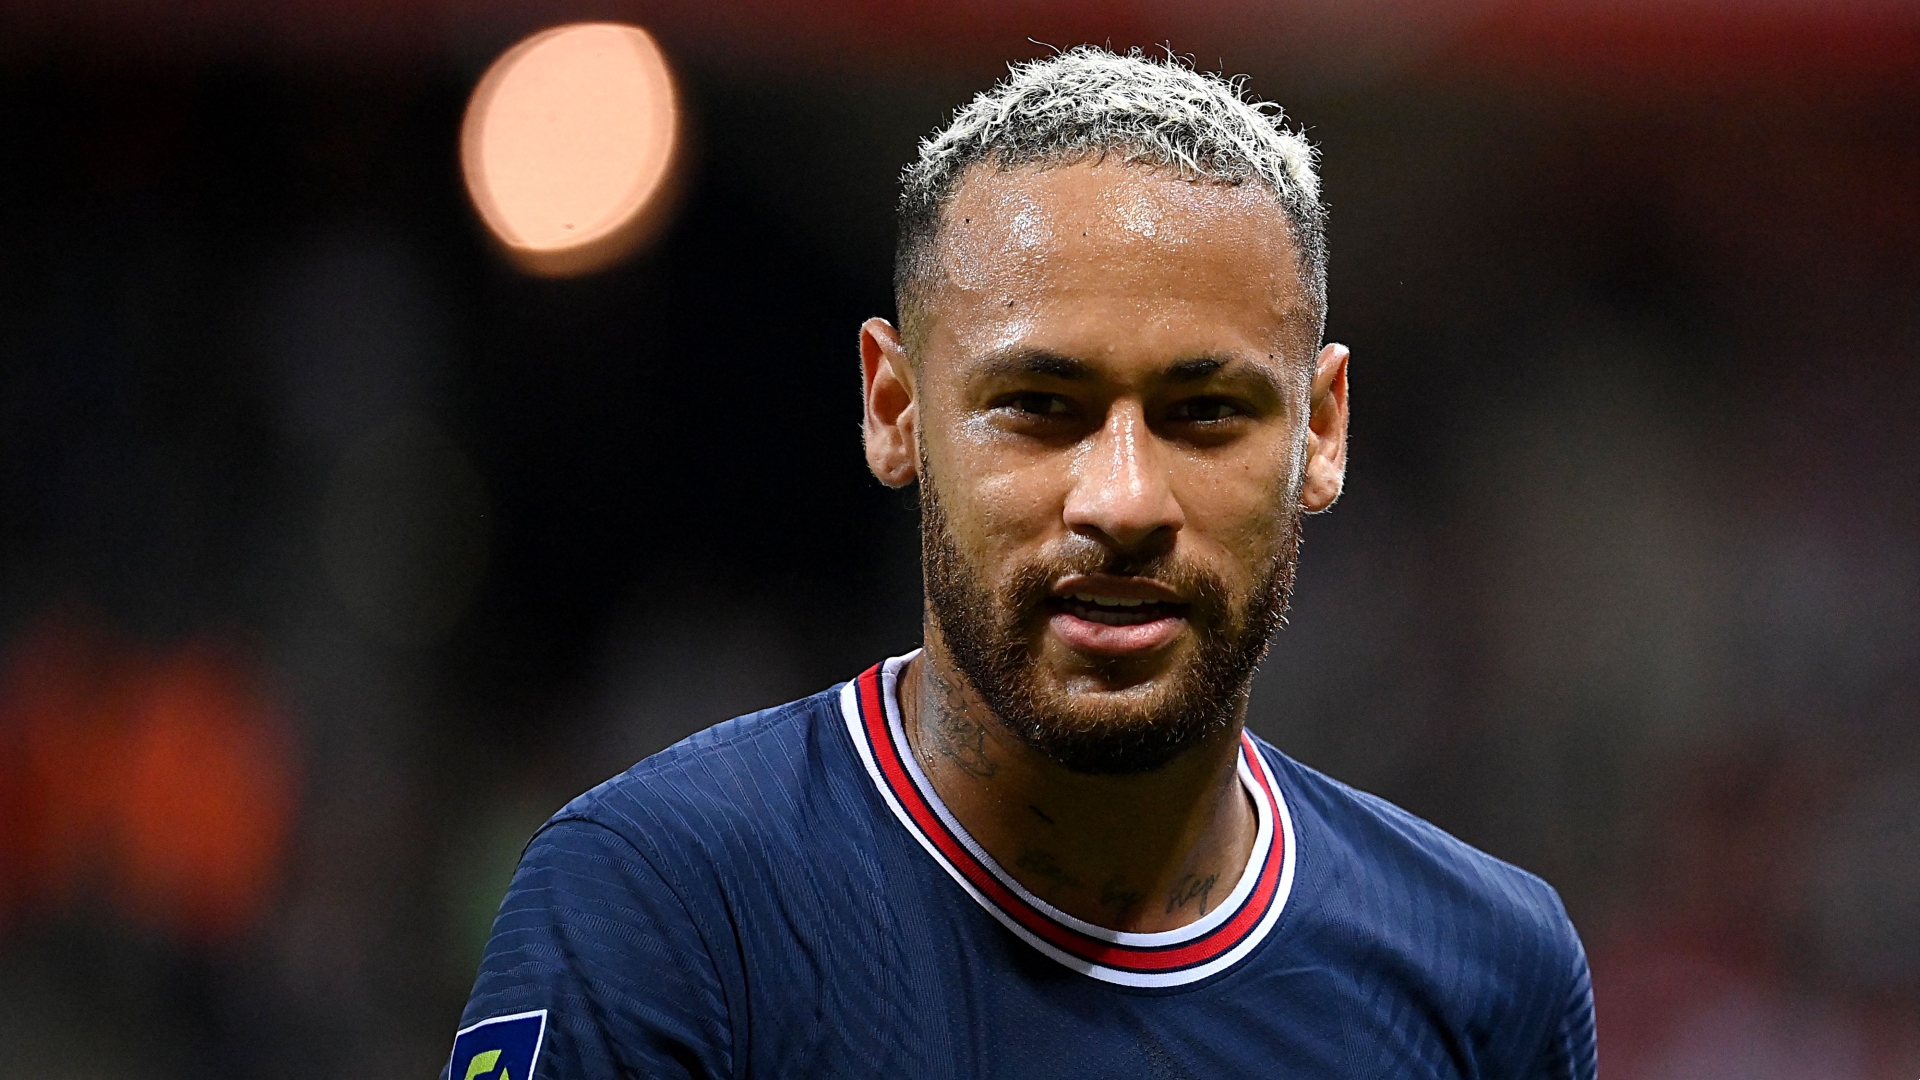 Neymar ruled out of PSG clash with RB Leipzig after picking up injury on international duty with Brazil